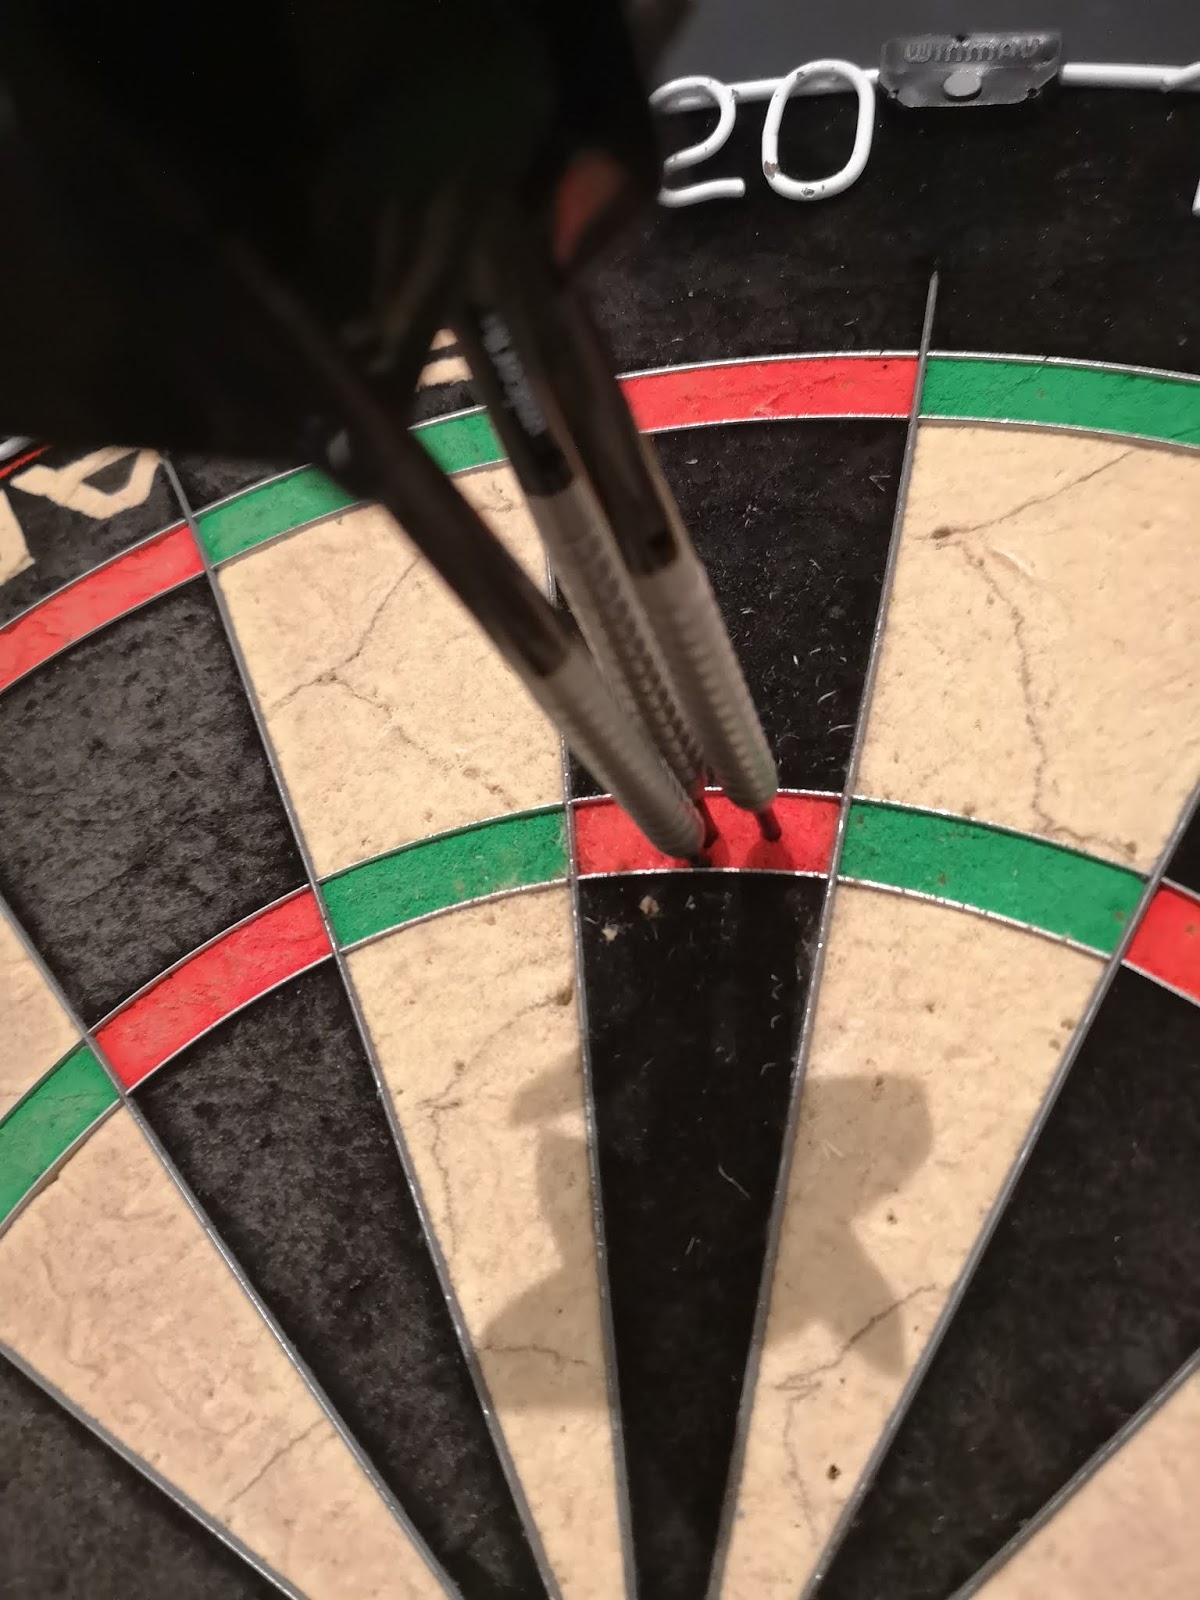 My Darts Journey - Trying to make it in the World of Darts!: 500 darts